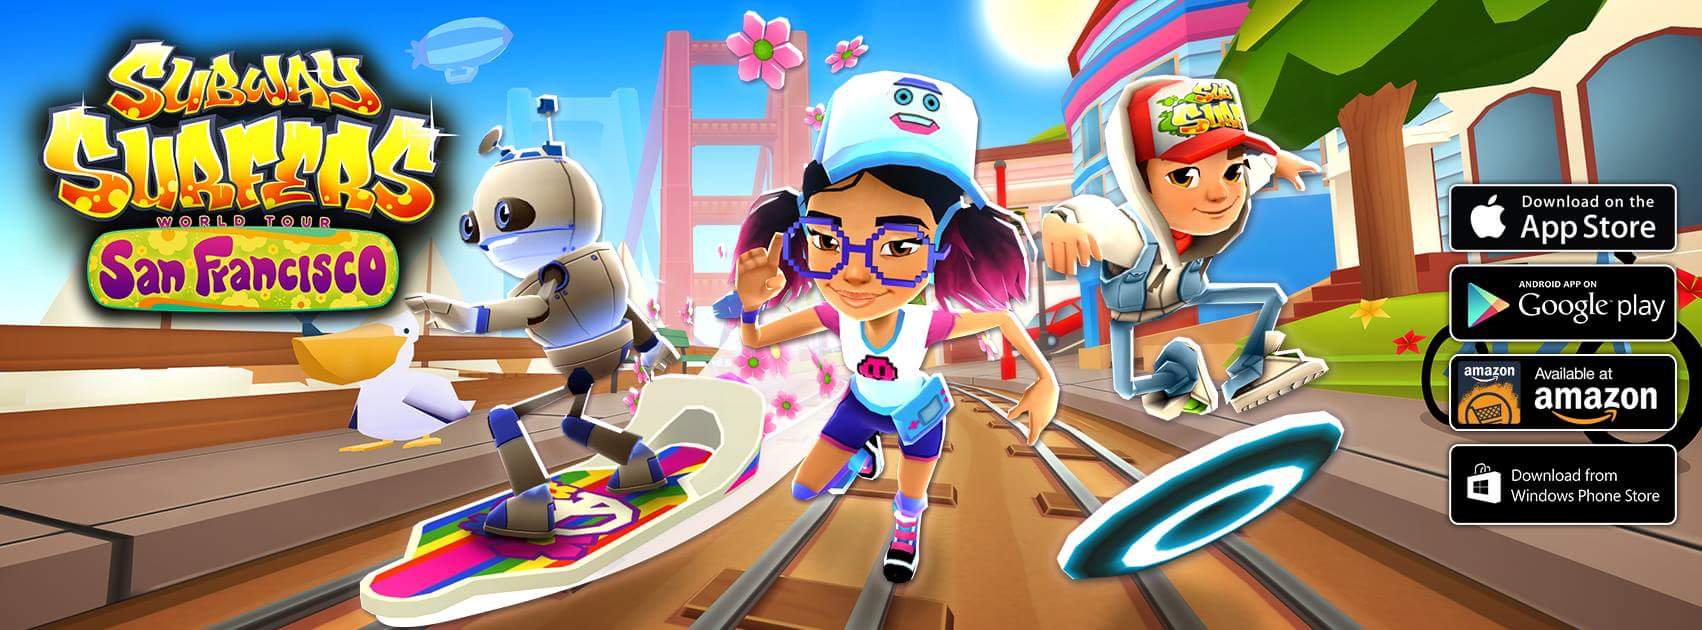 Subway surfers game download for windows 10